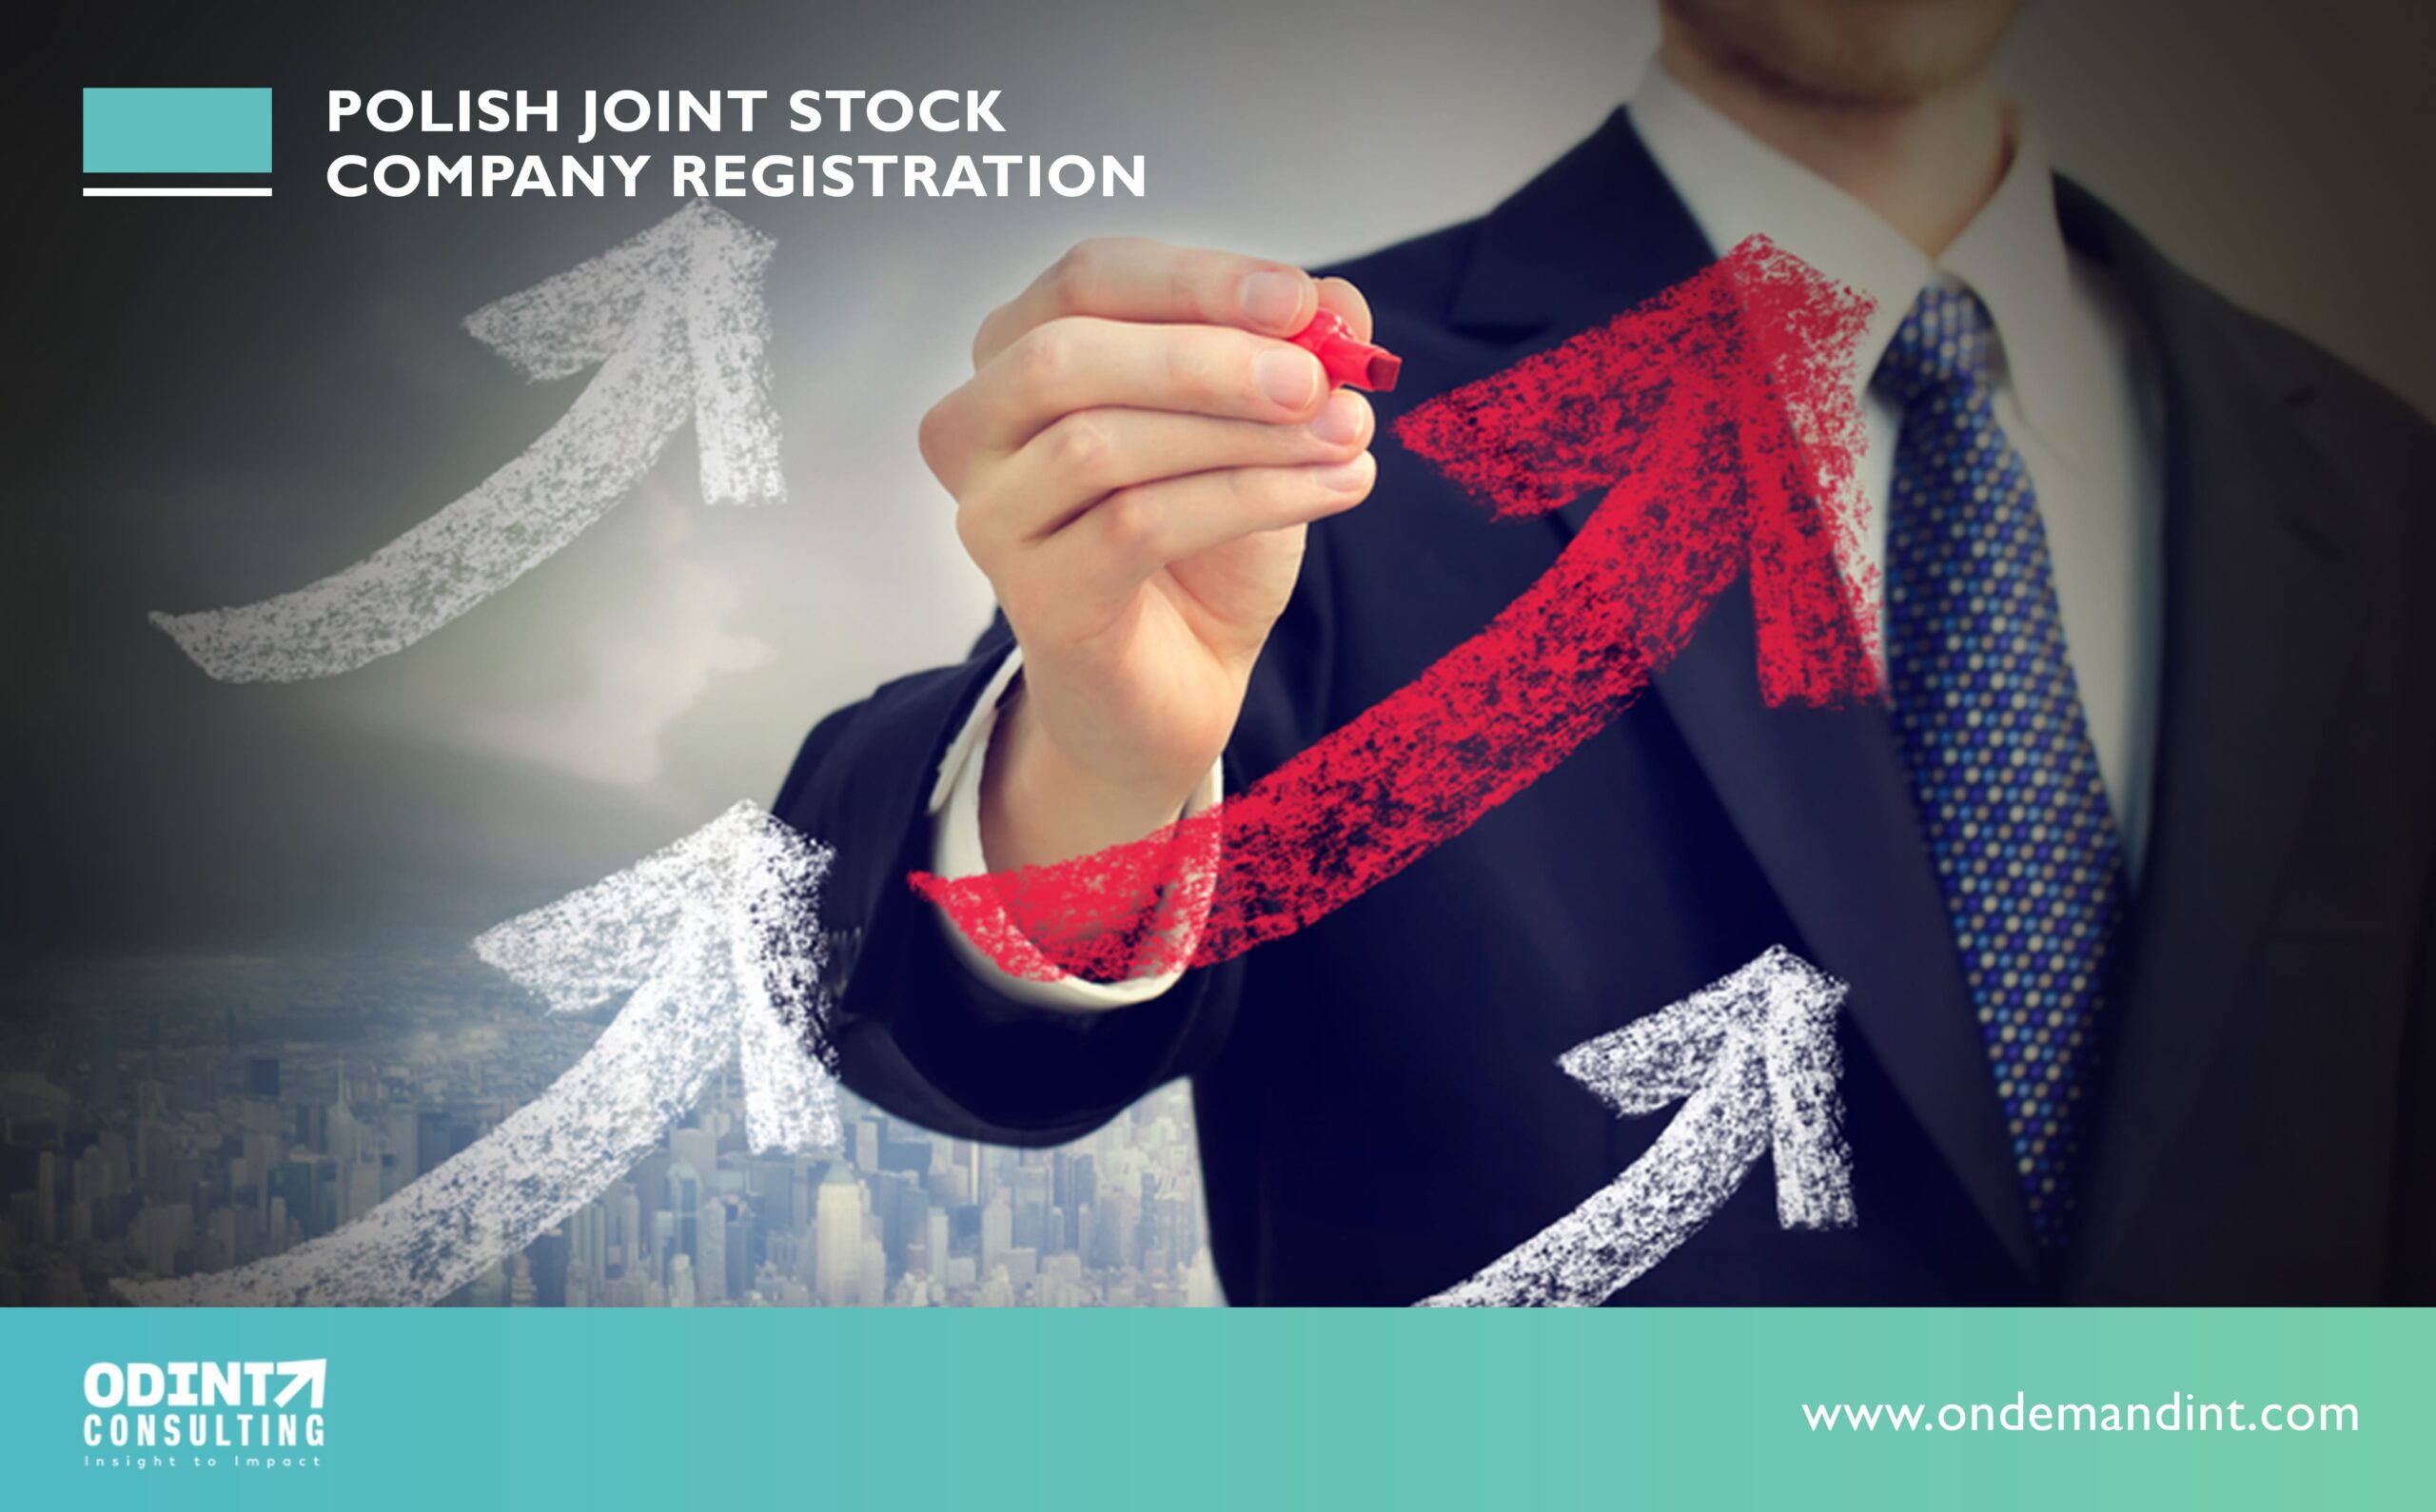 Polish Joint Stock Company Registration in 2022-23: Benefits, Requirements & Process